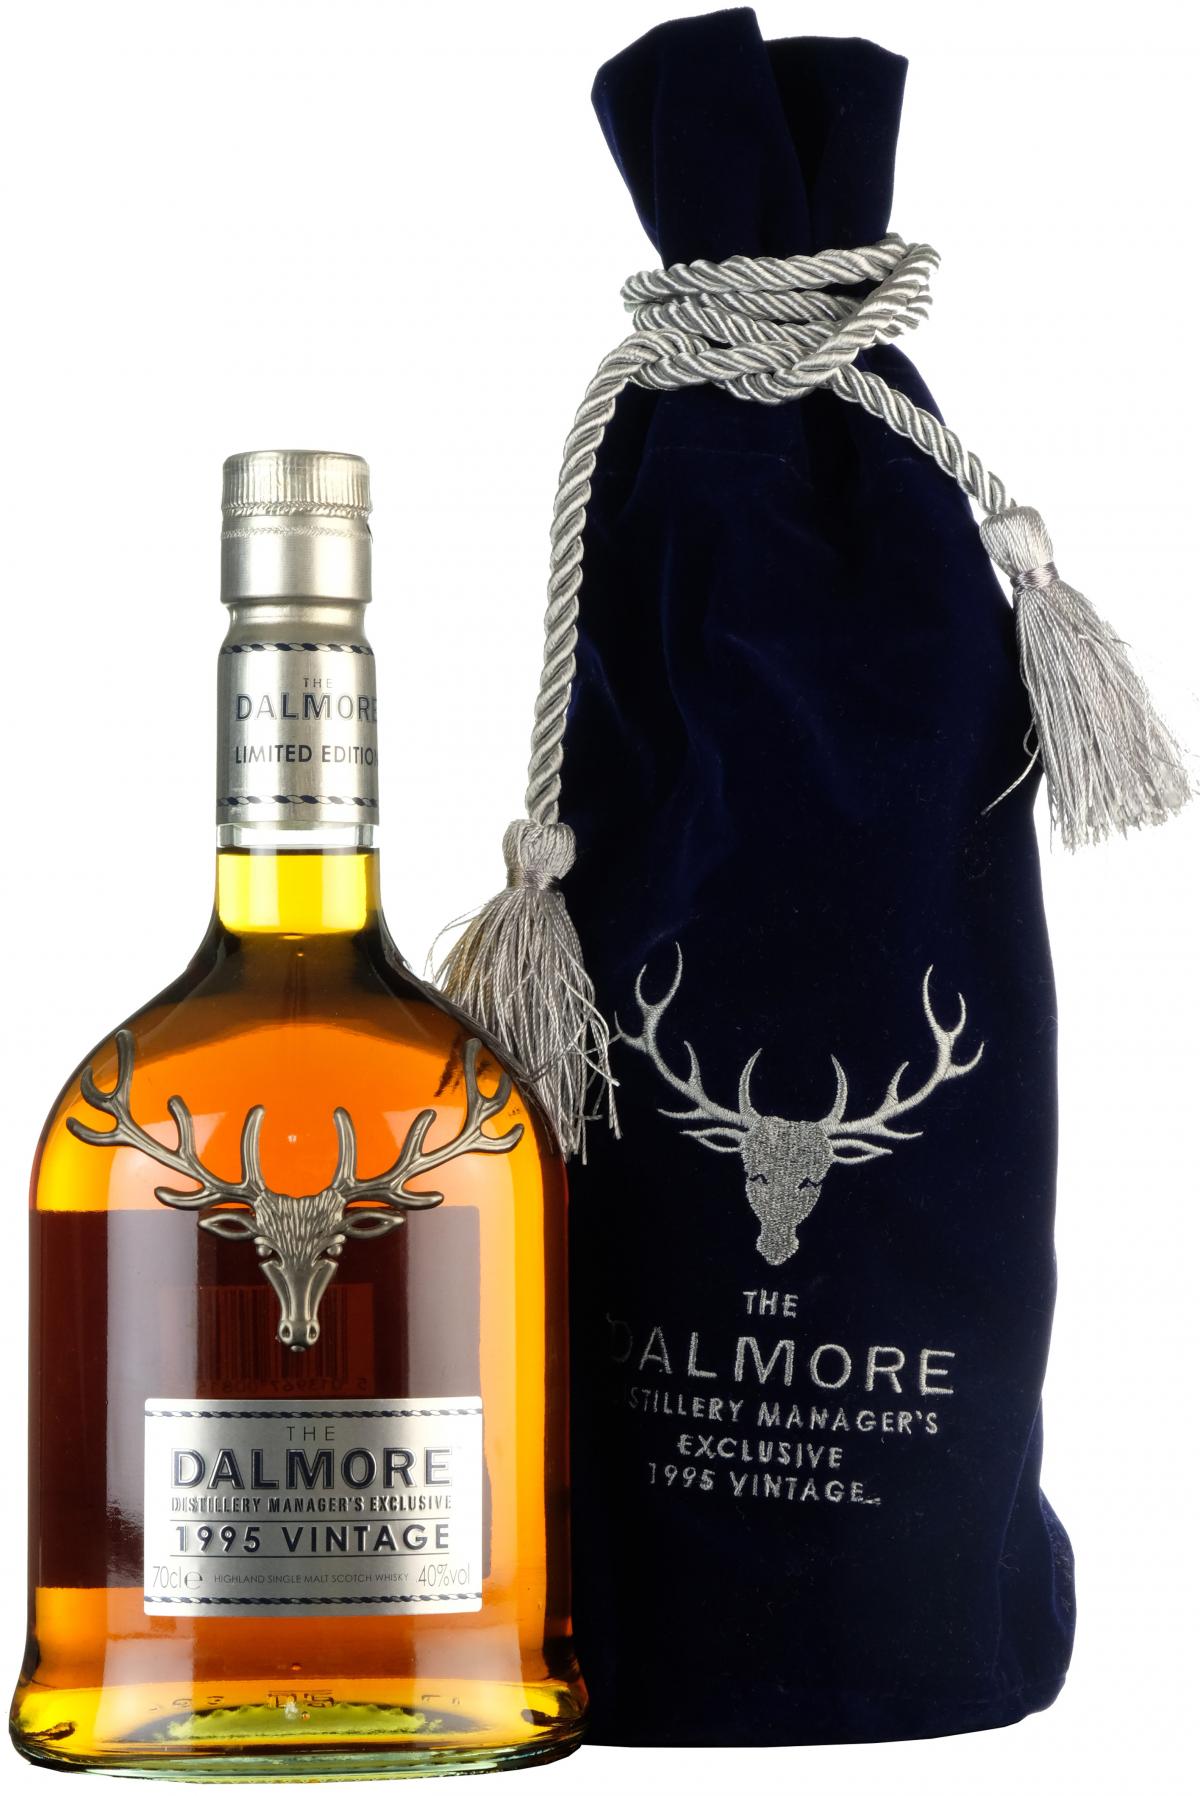 Dalmore 1995 Vintage | Distillery Manager's Exclusive